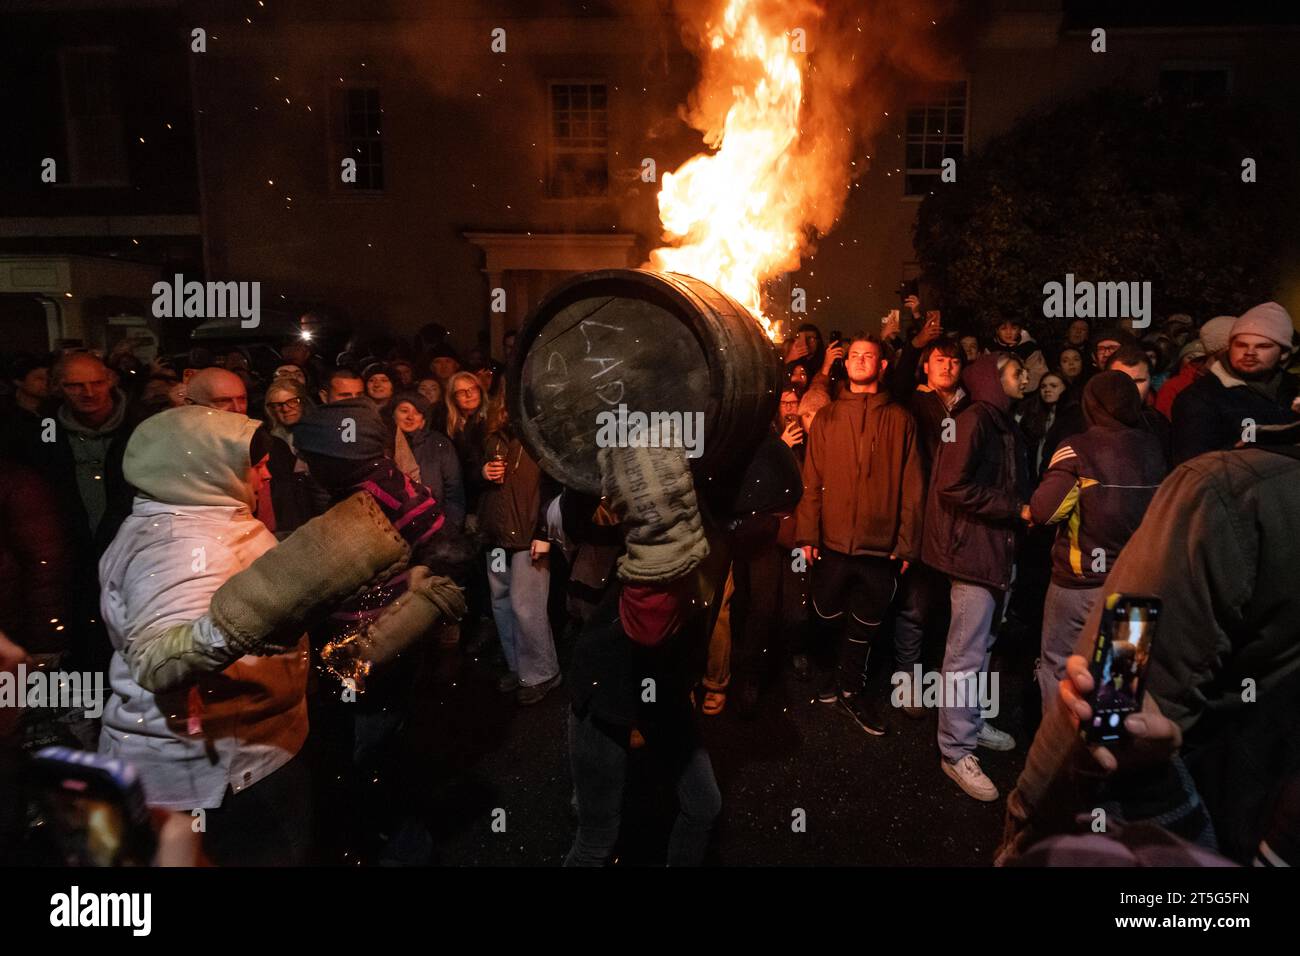 Ottery St Mary, UK. Saturday 4 November 2023. Locals take part in the Ottery St Mary Burning Tar Barrels. Running with burning barrels through the streets of Ottery St Mary in Devon in a traditional event stretching back hundreds of years. Credit: Thomas Faull/Alamy Live News Stock Photo